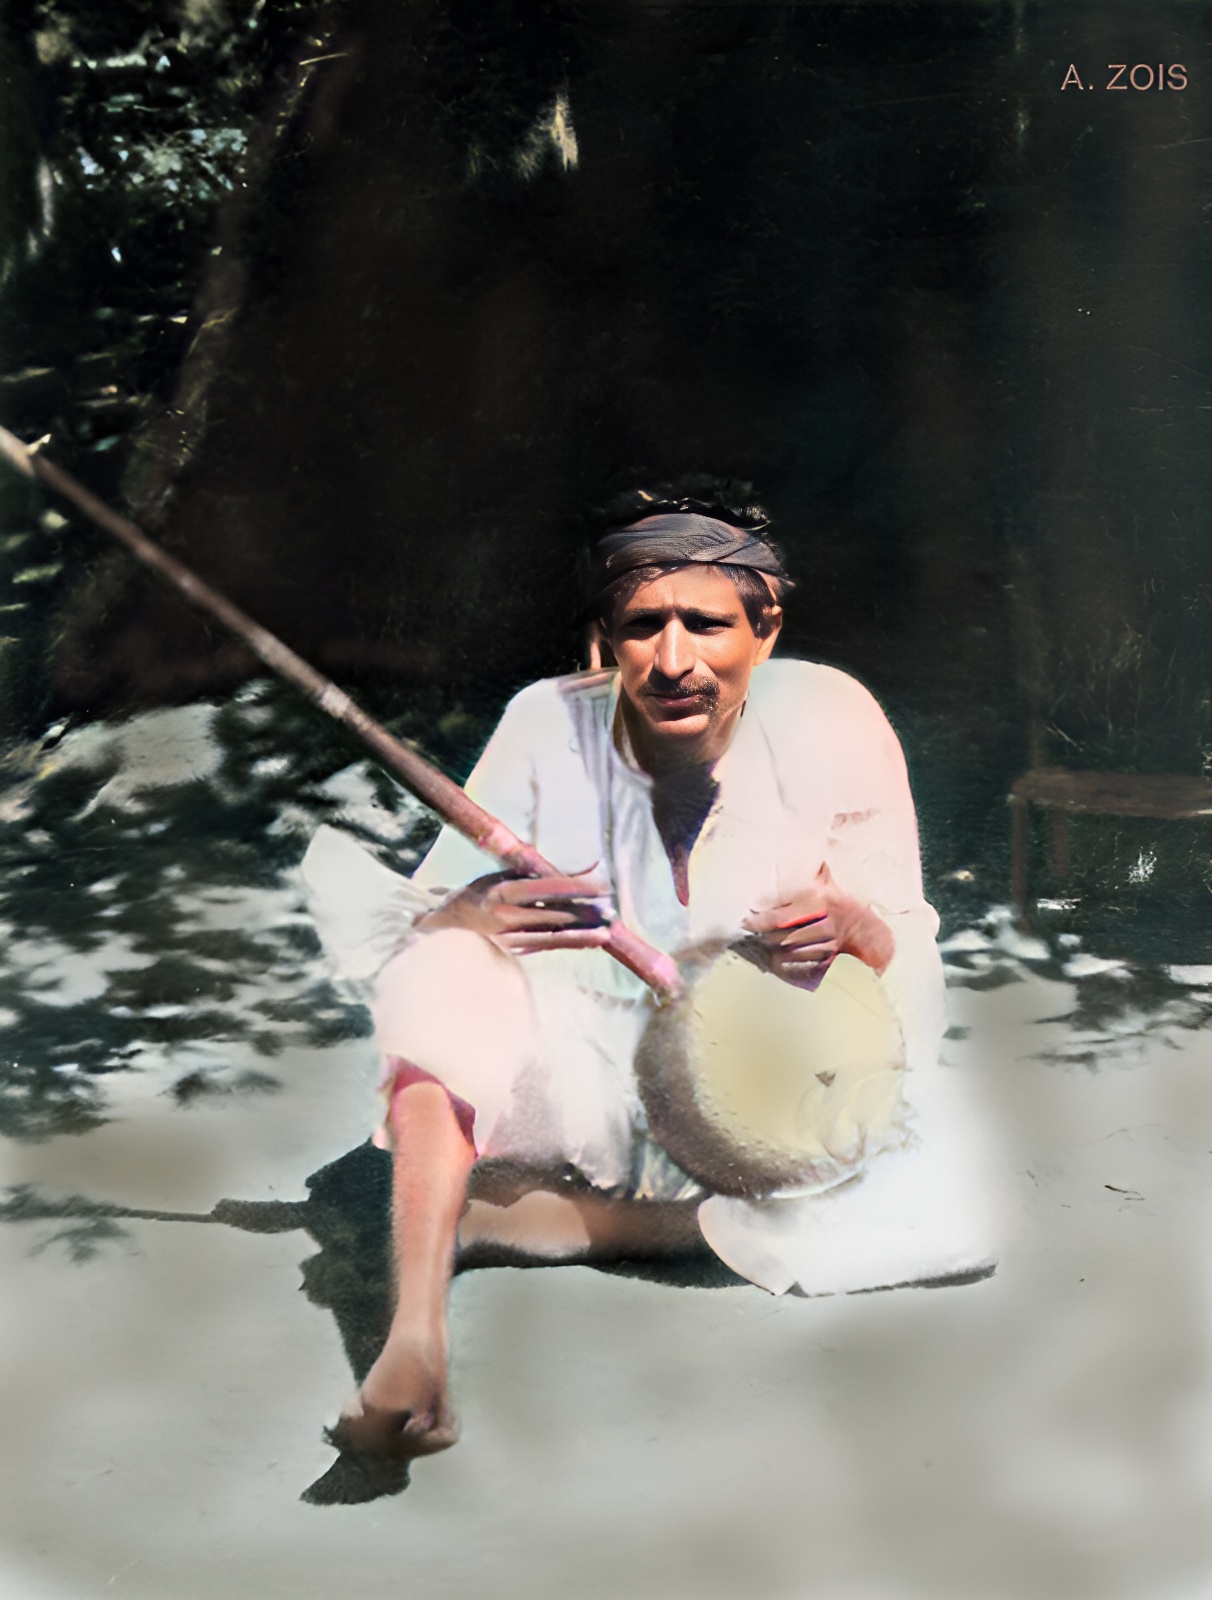 1922 : Poona, India. Meher Baba playing an Indian instrument outside his thatched hut. Image rendering by Anthony Zois.